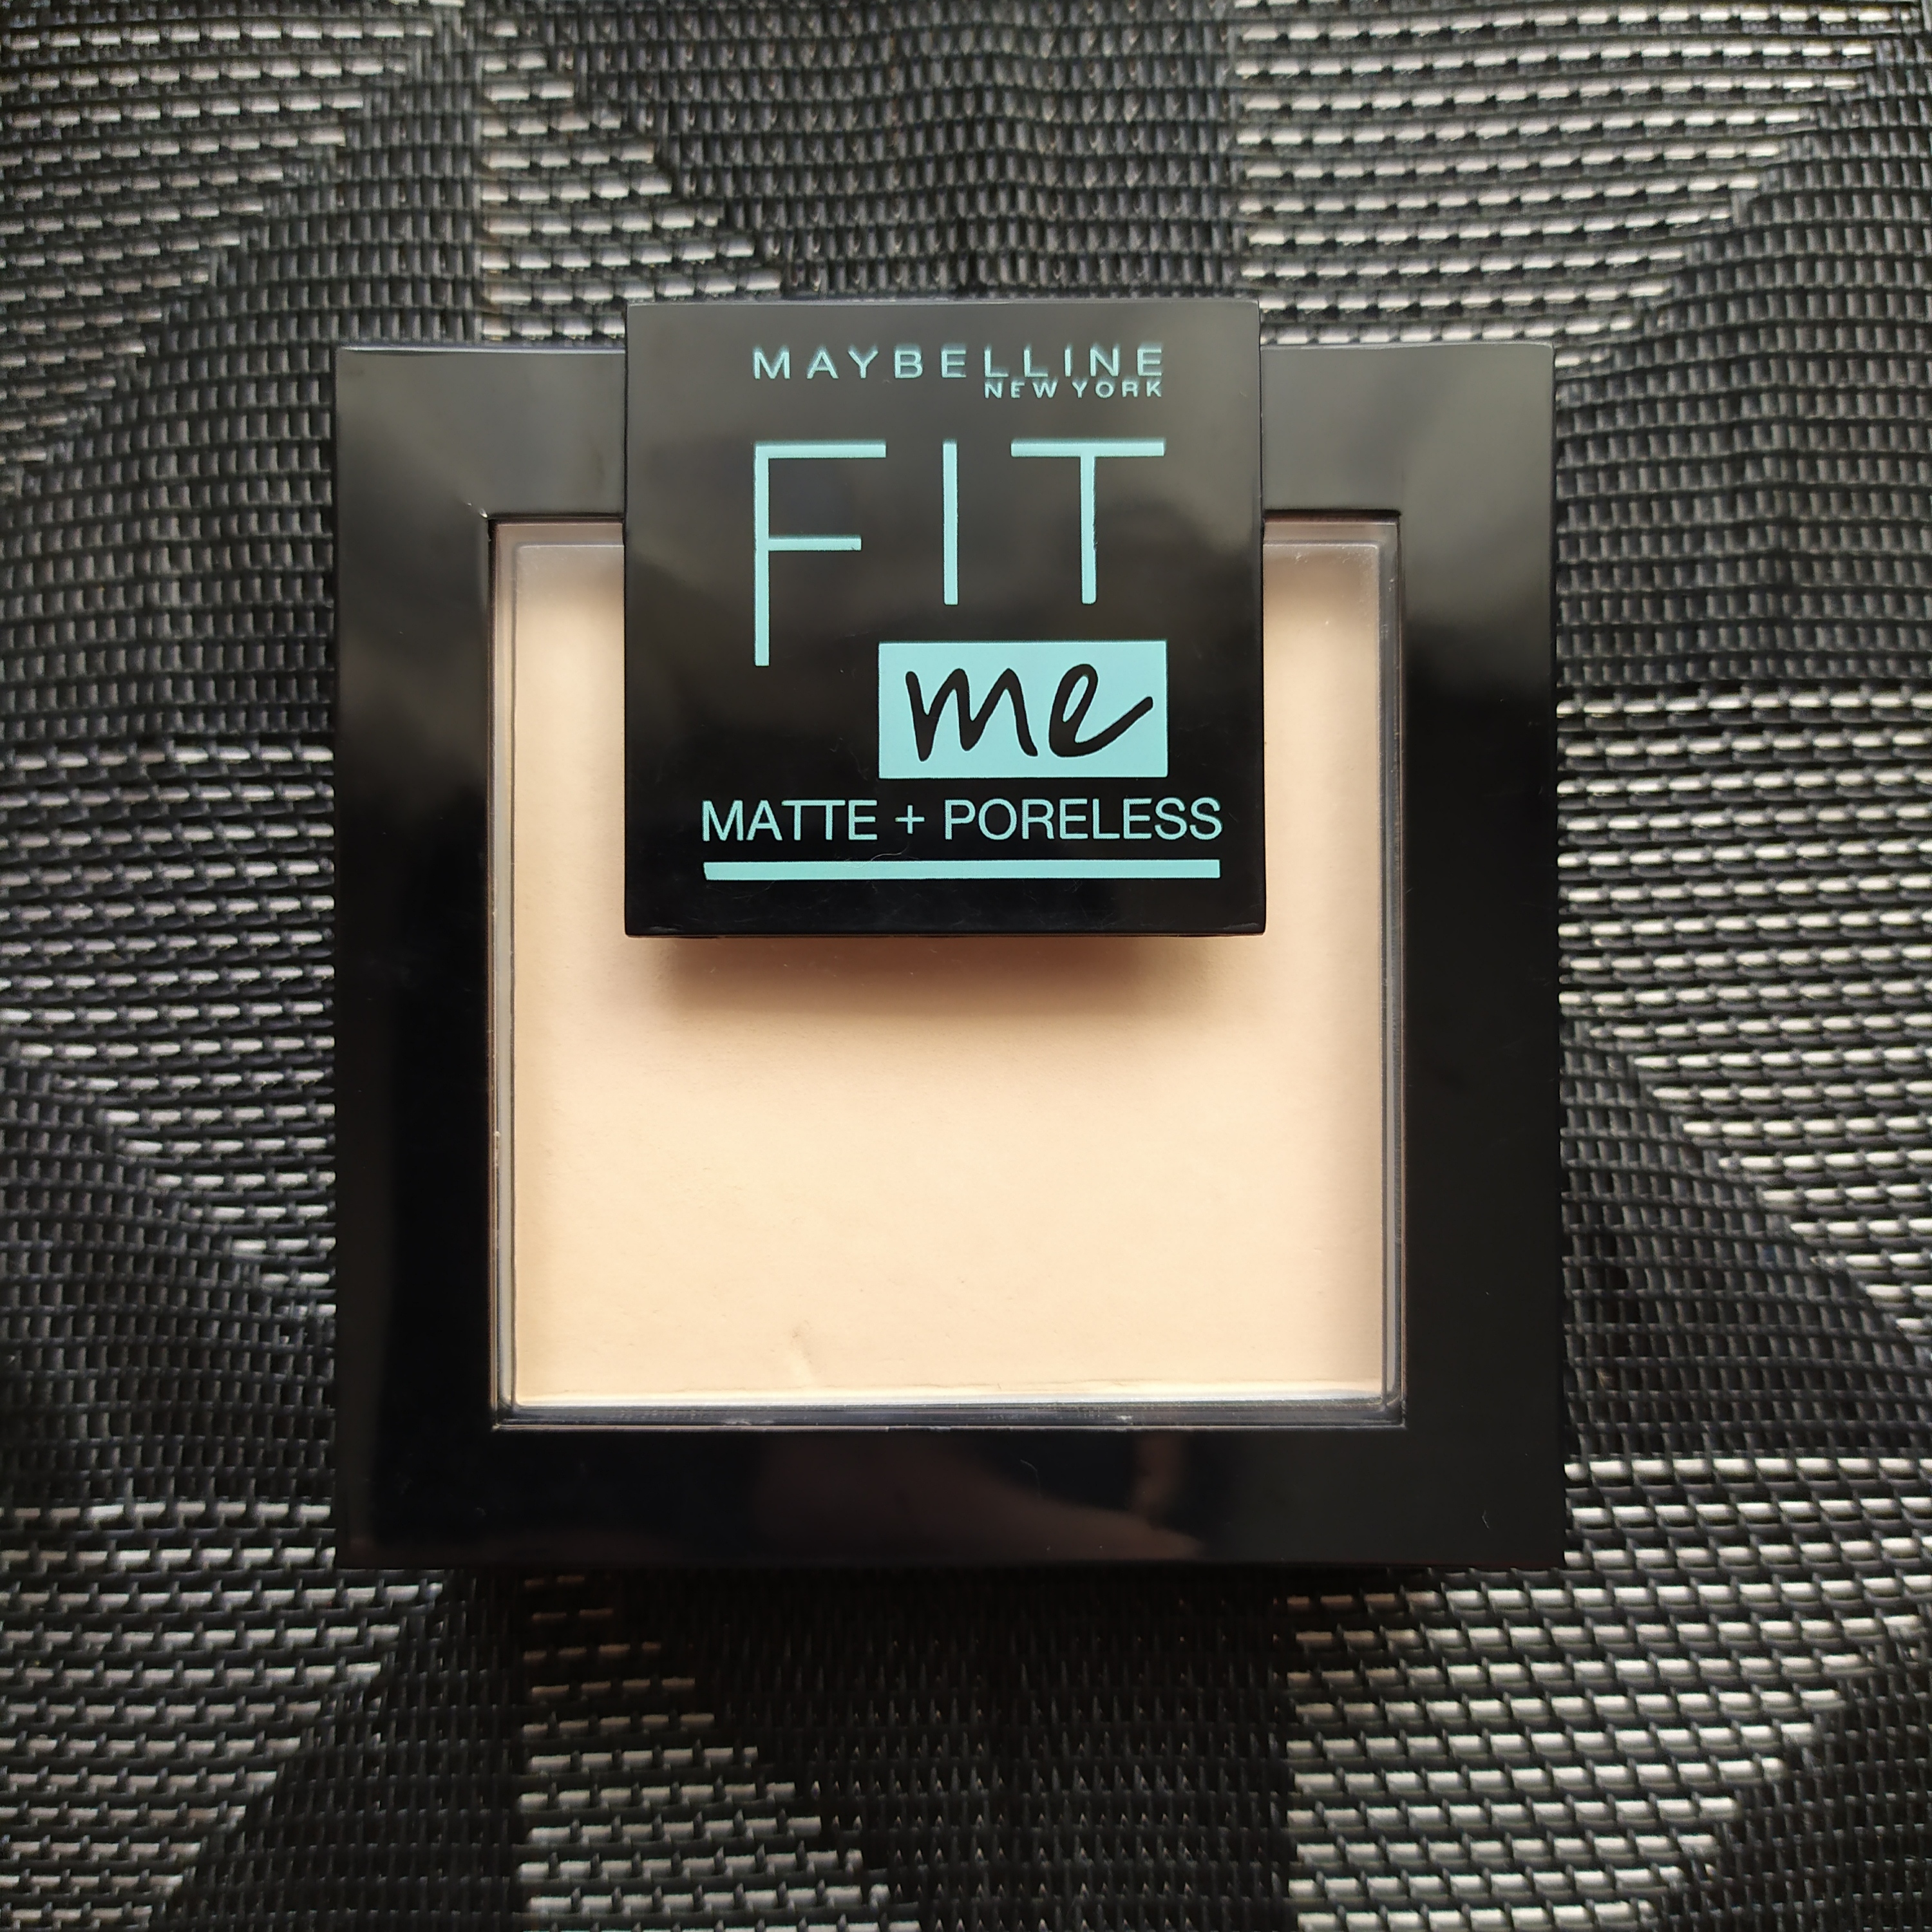 Пудра Maybelline Fit Me